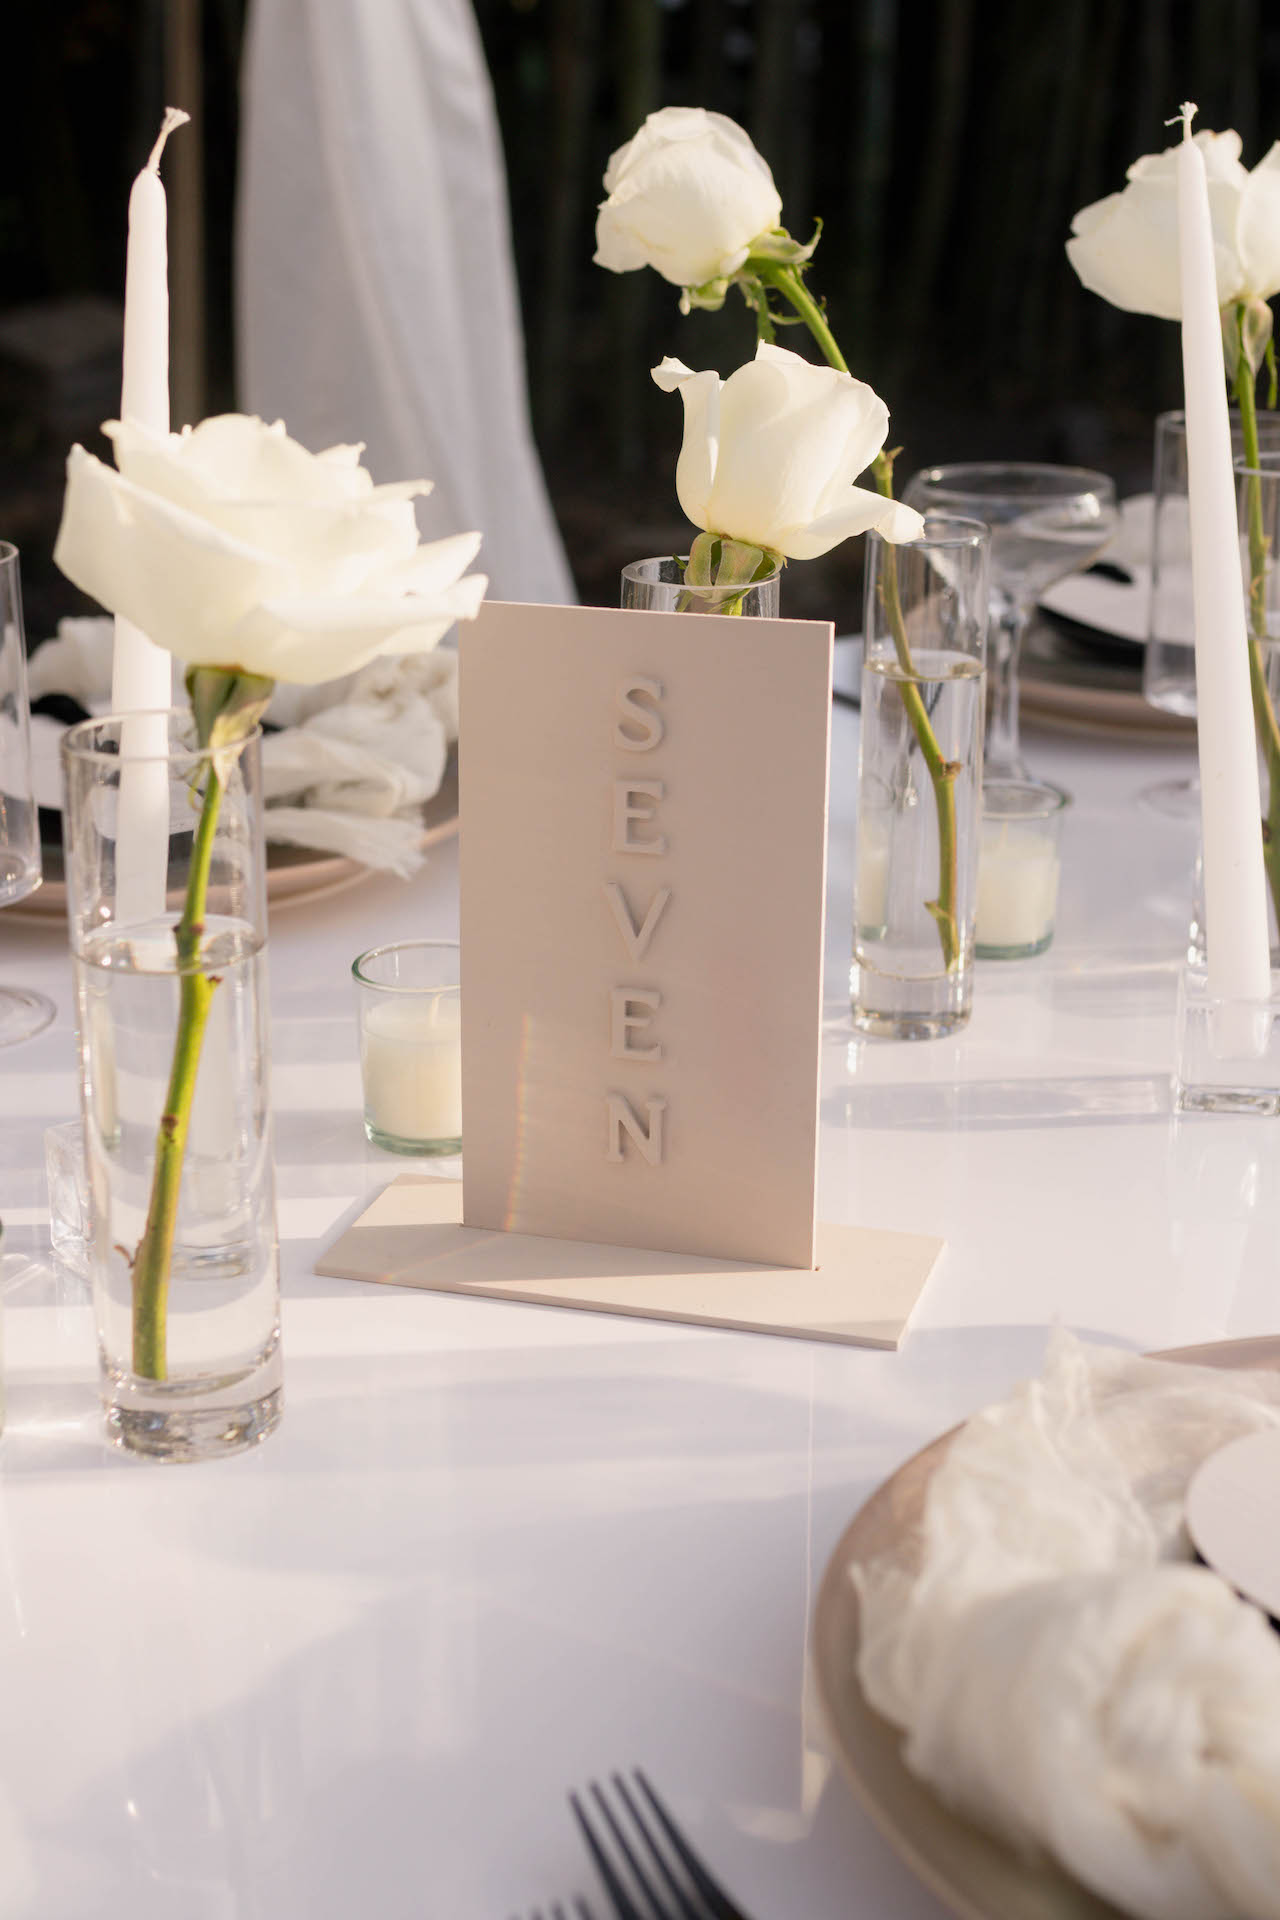 Stone table number rentals